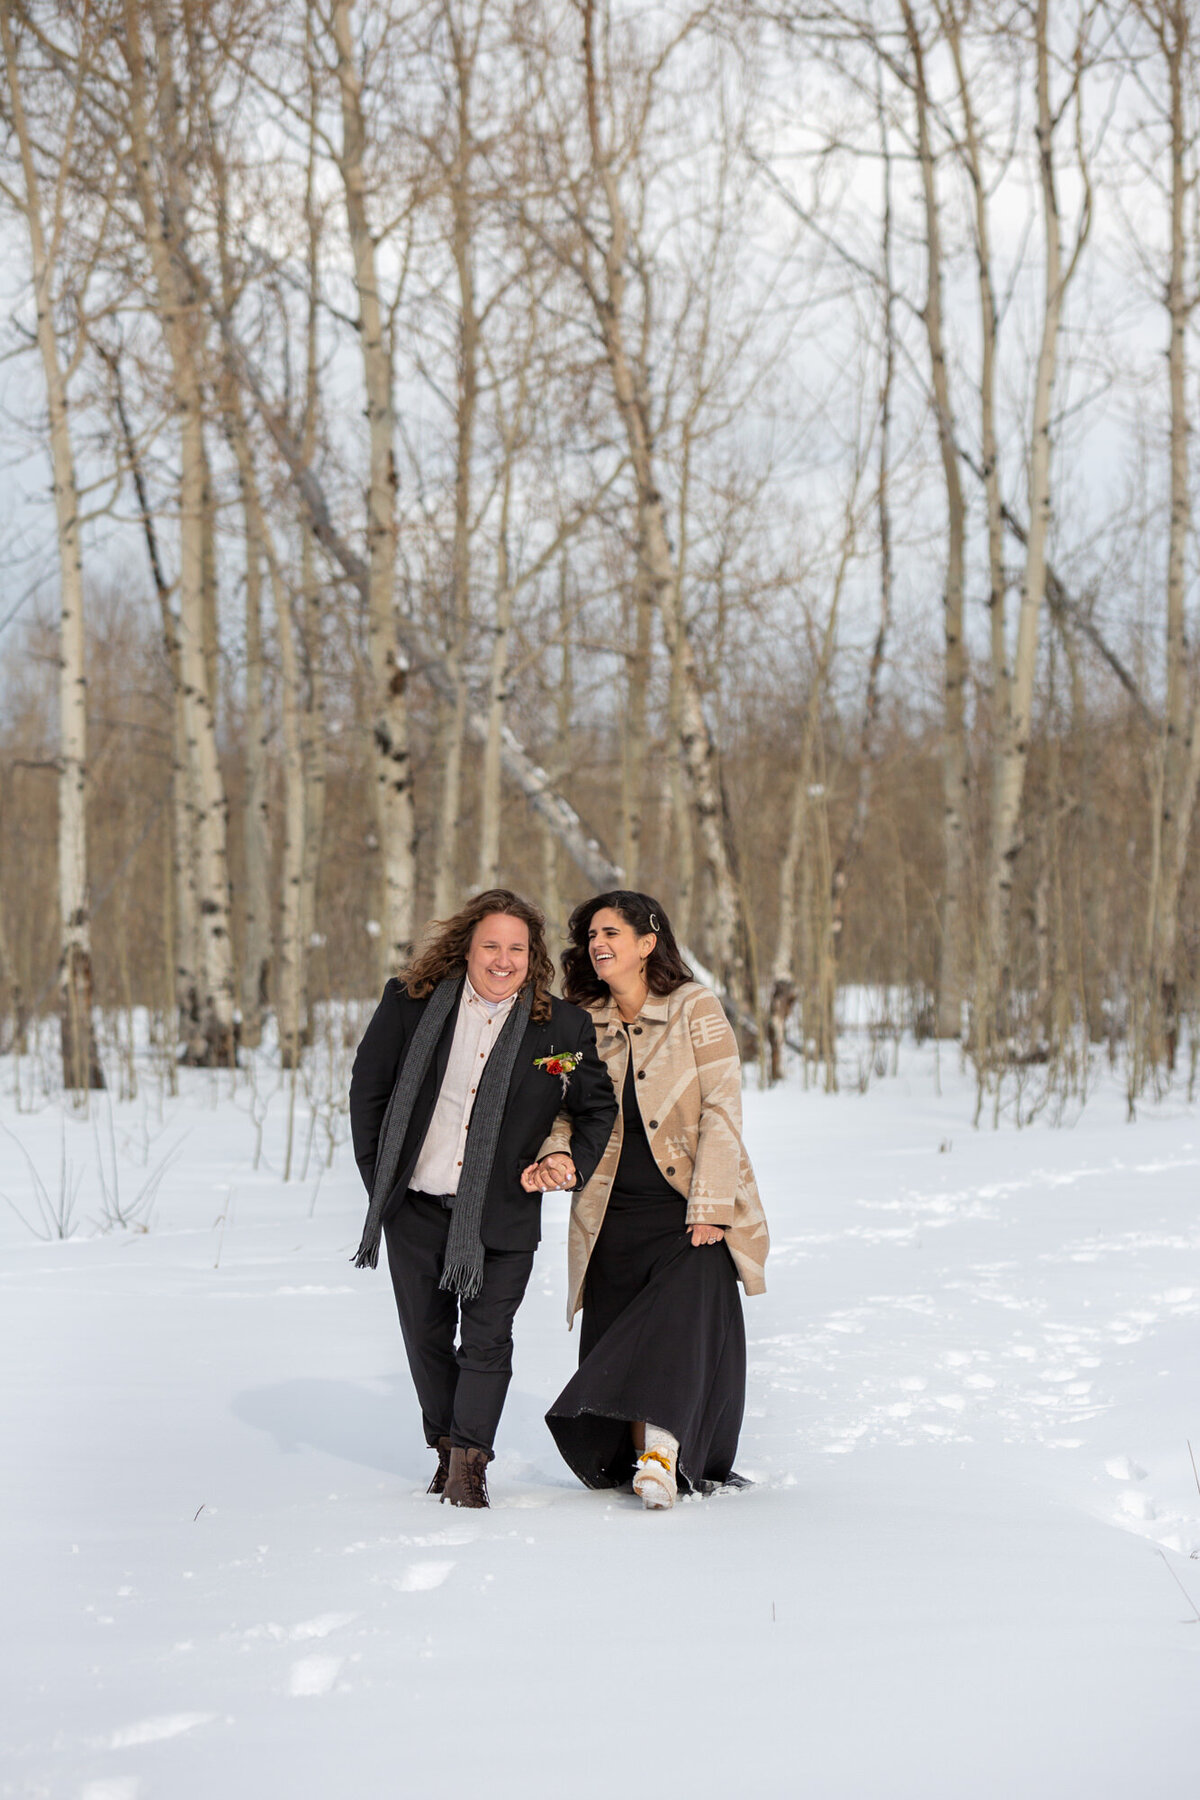 Two brides walk side by side through the snow on their Wyoming elopement day.